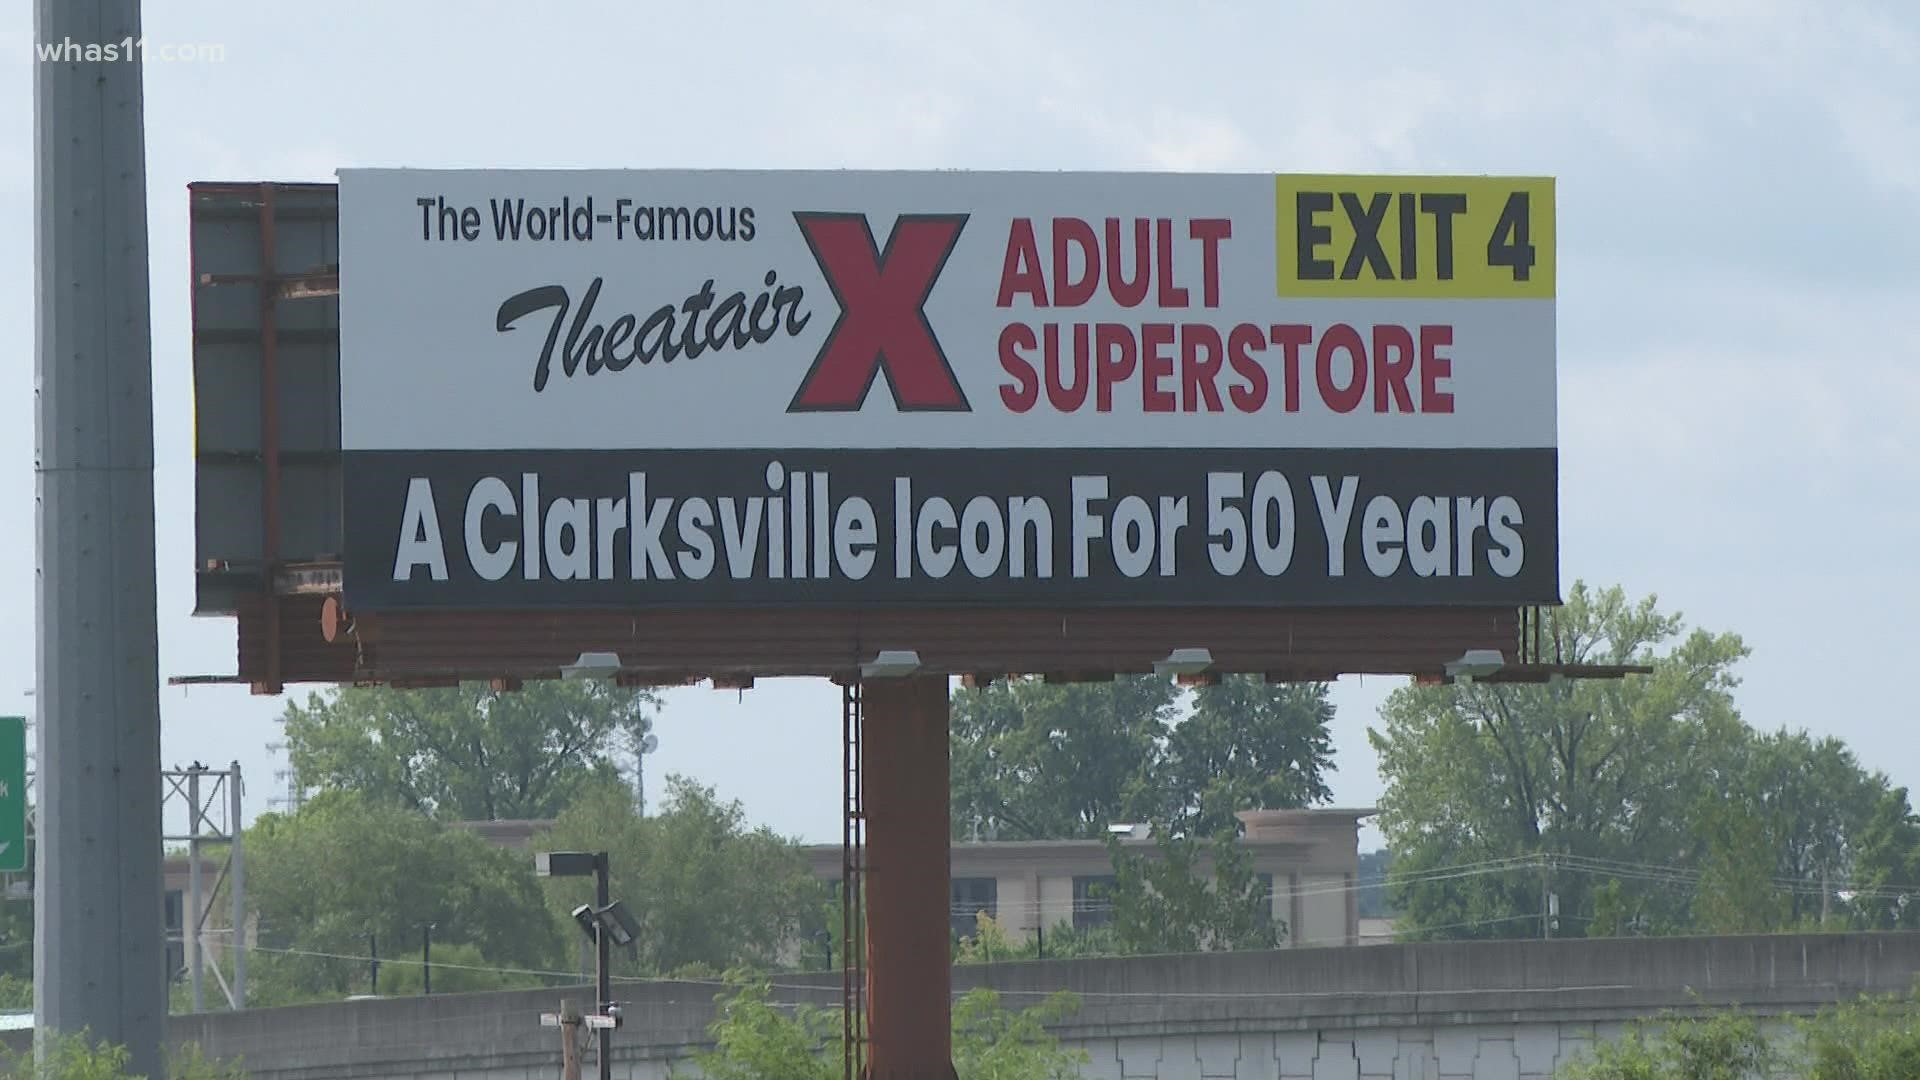 At the direction of a federal judge, the town gave Theatiar X a temporary license to reopen that is now invalid.